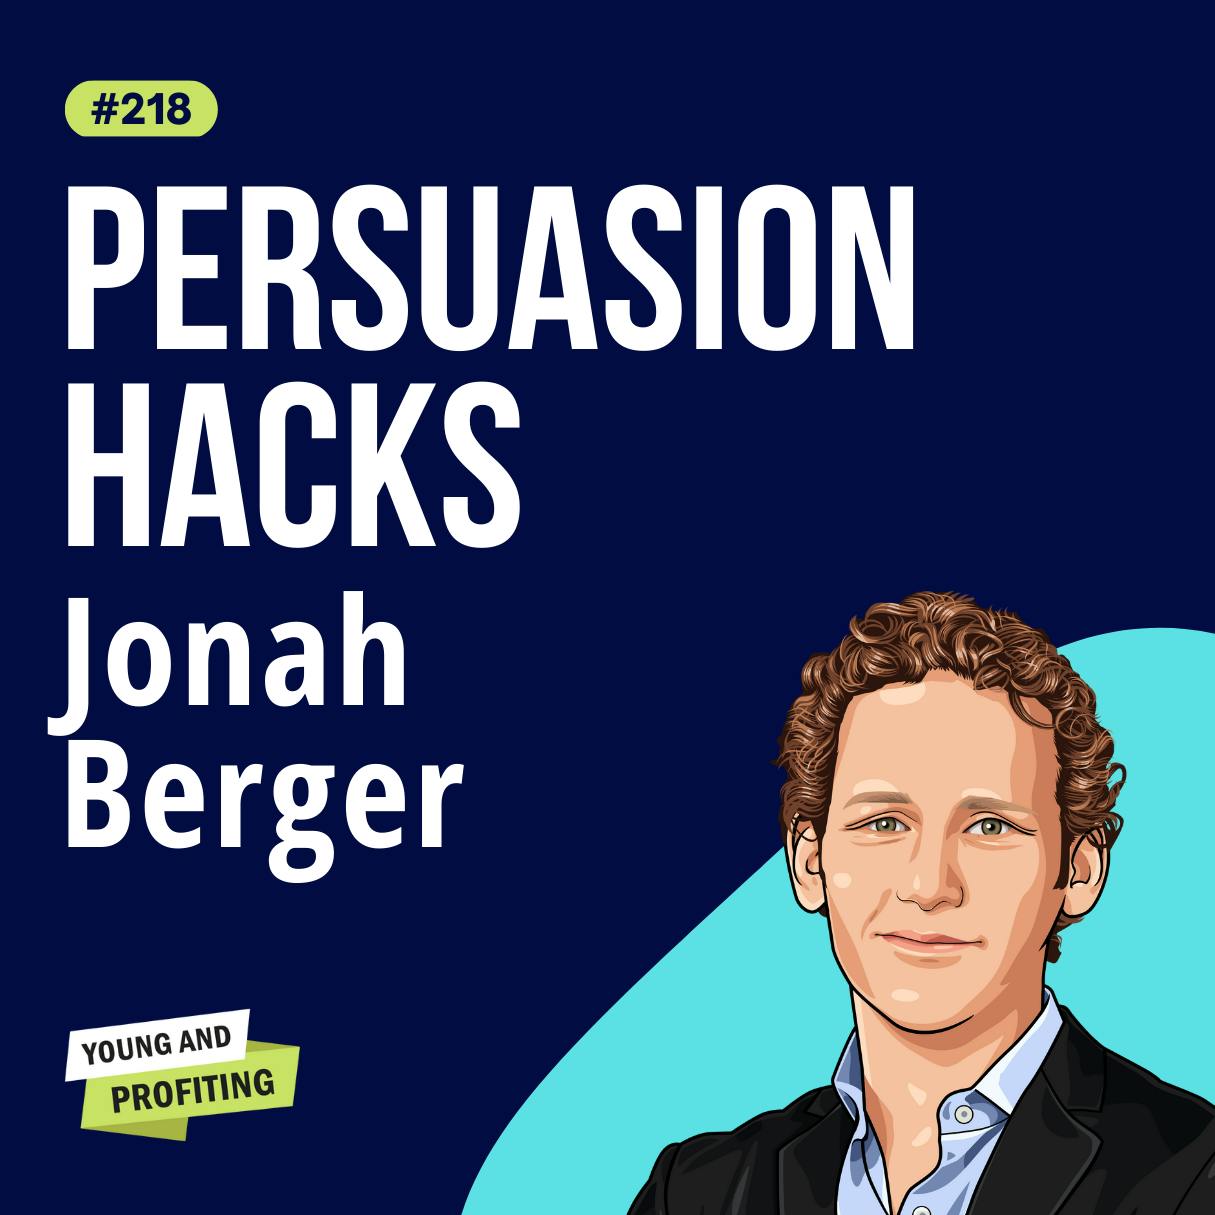 Jonah Berger: Magic Words, What to Say to Get Your Way | E218 by Hala Taha | YAP Media Network